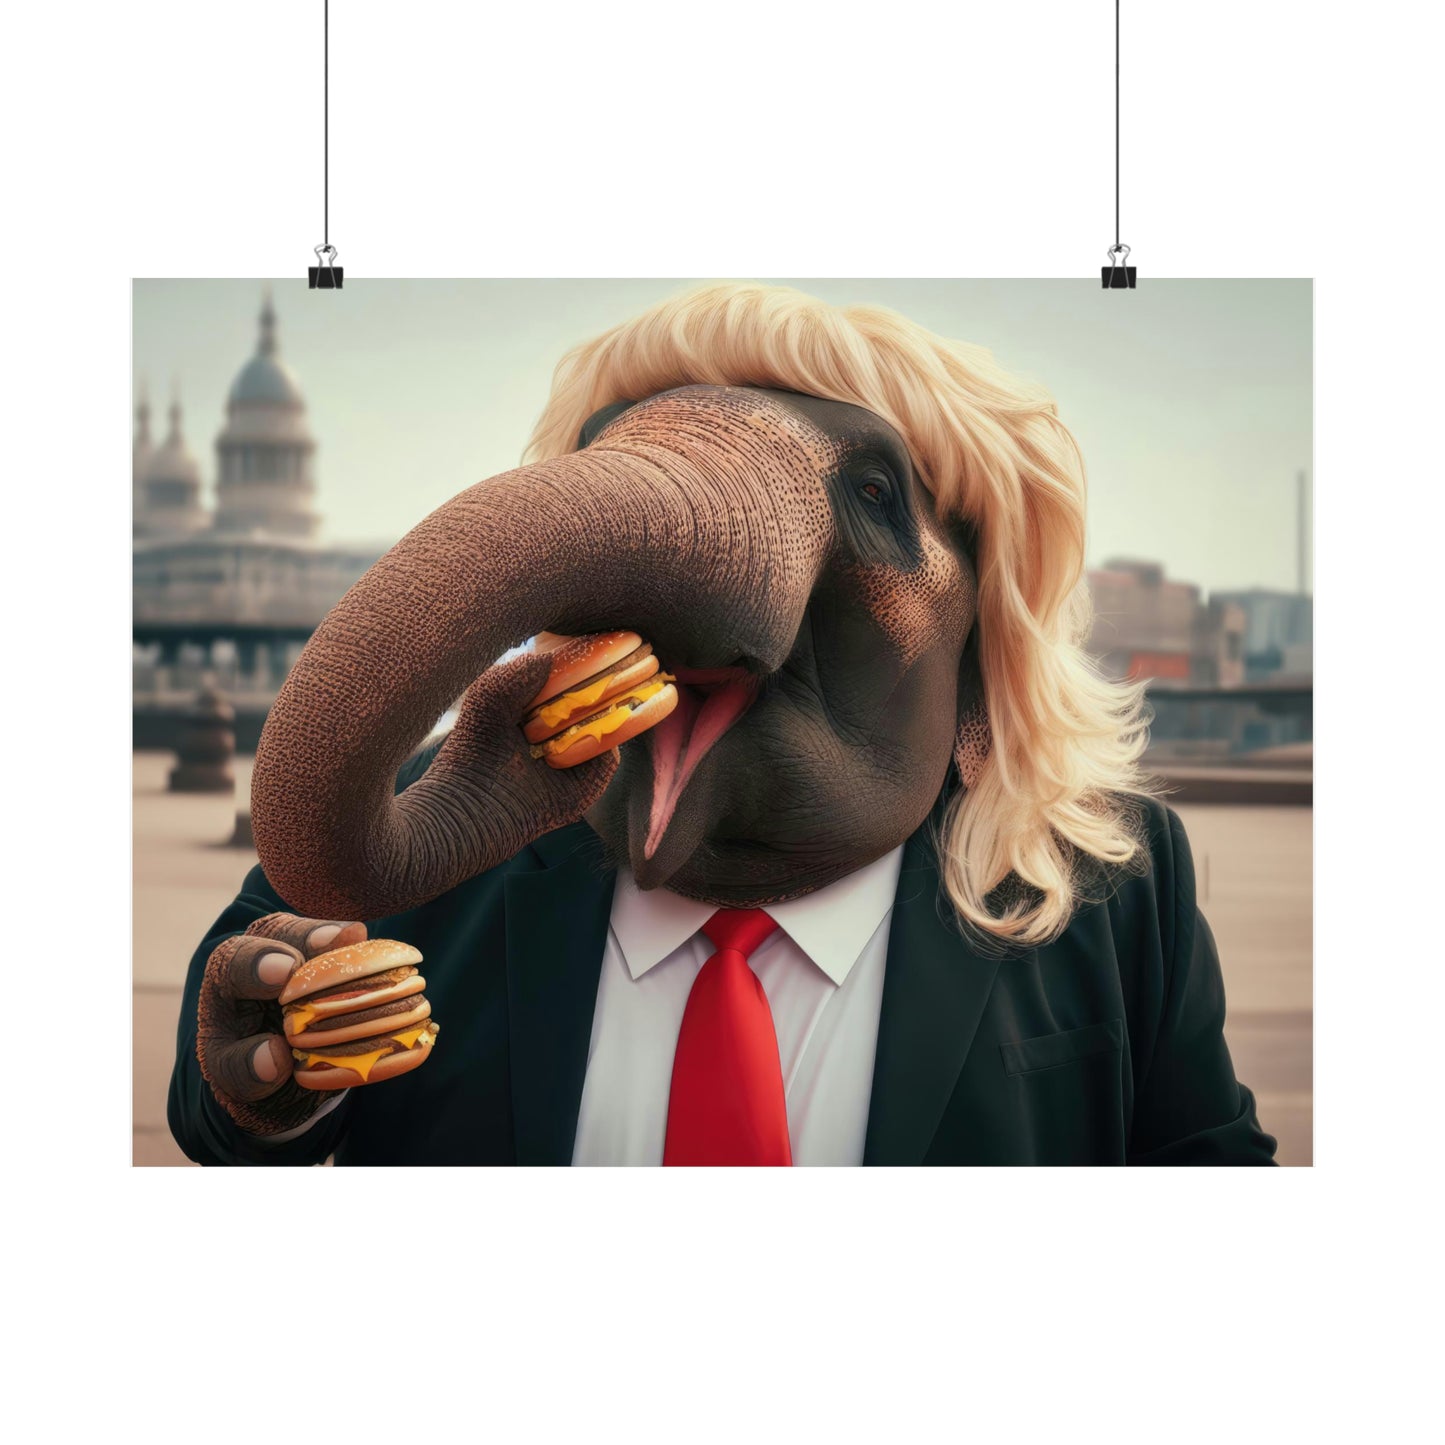 Trumpy Lunch On The Go Poster